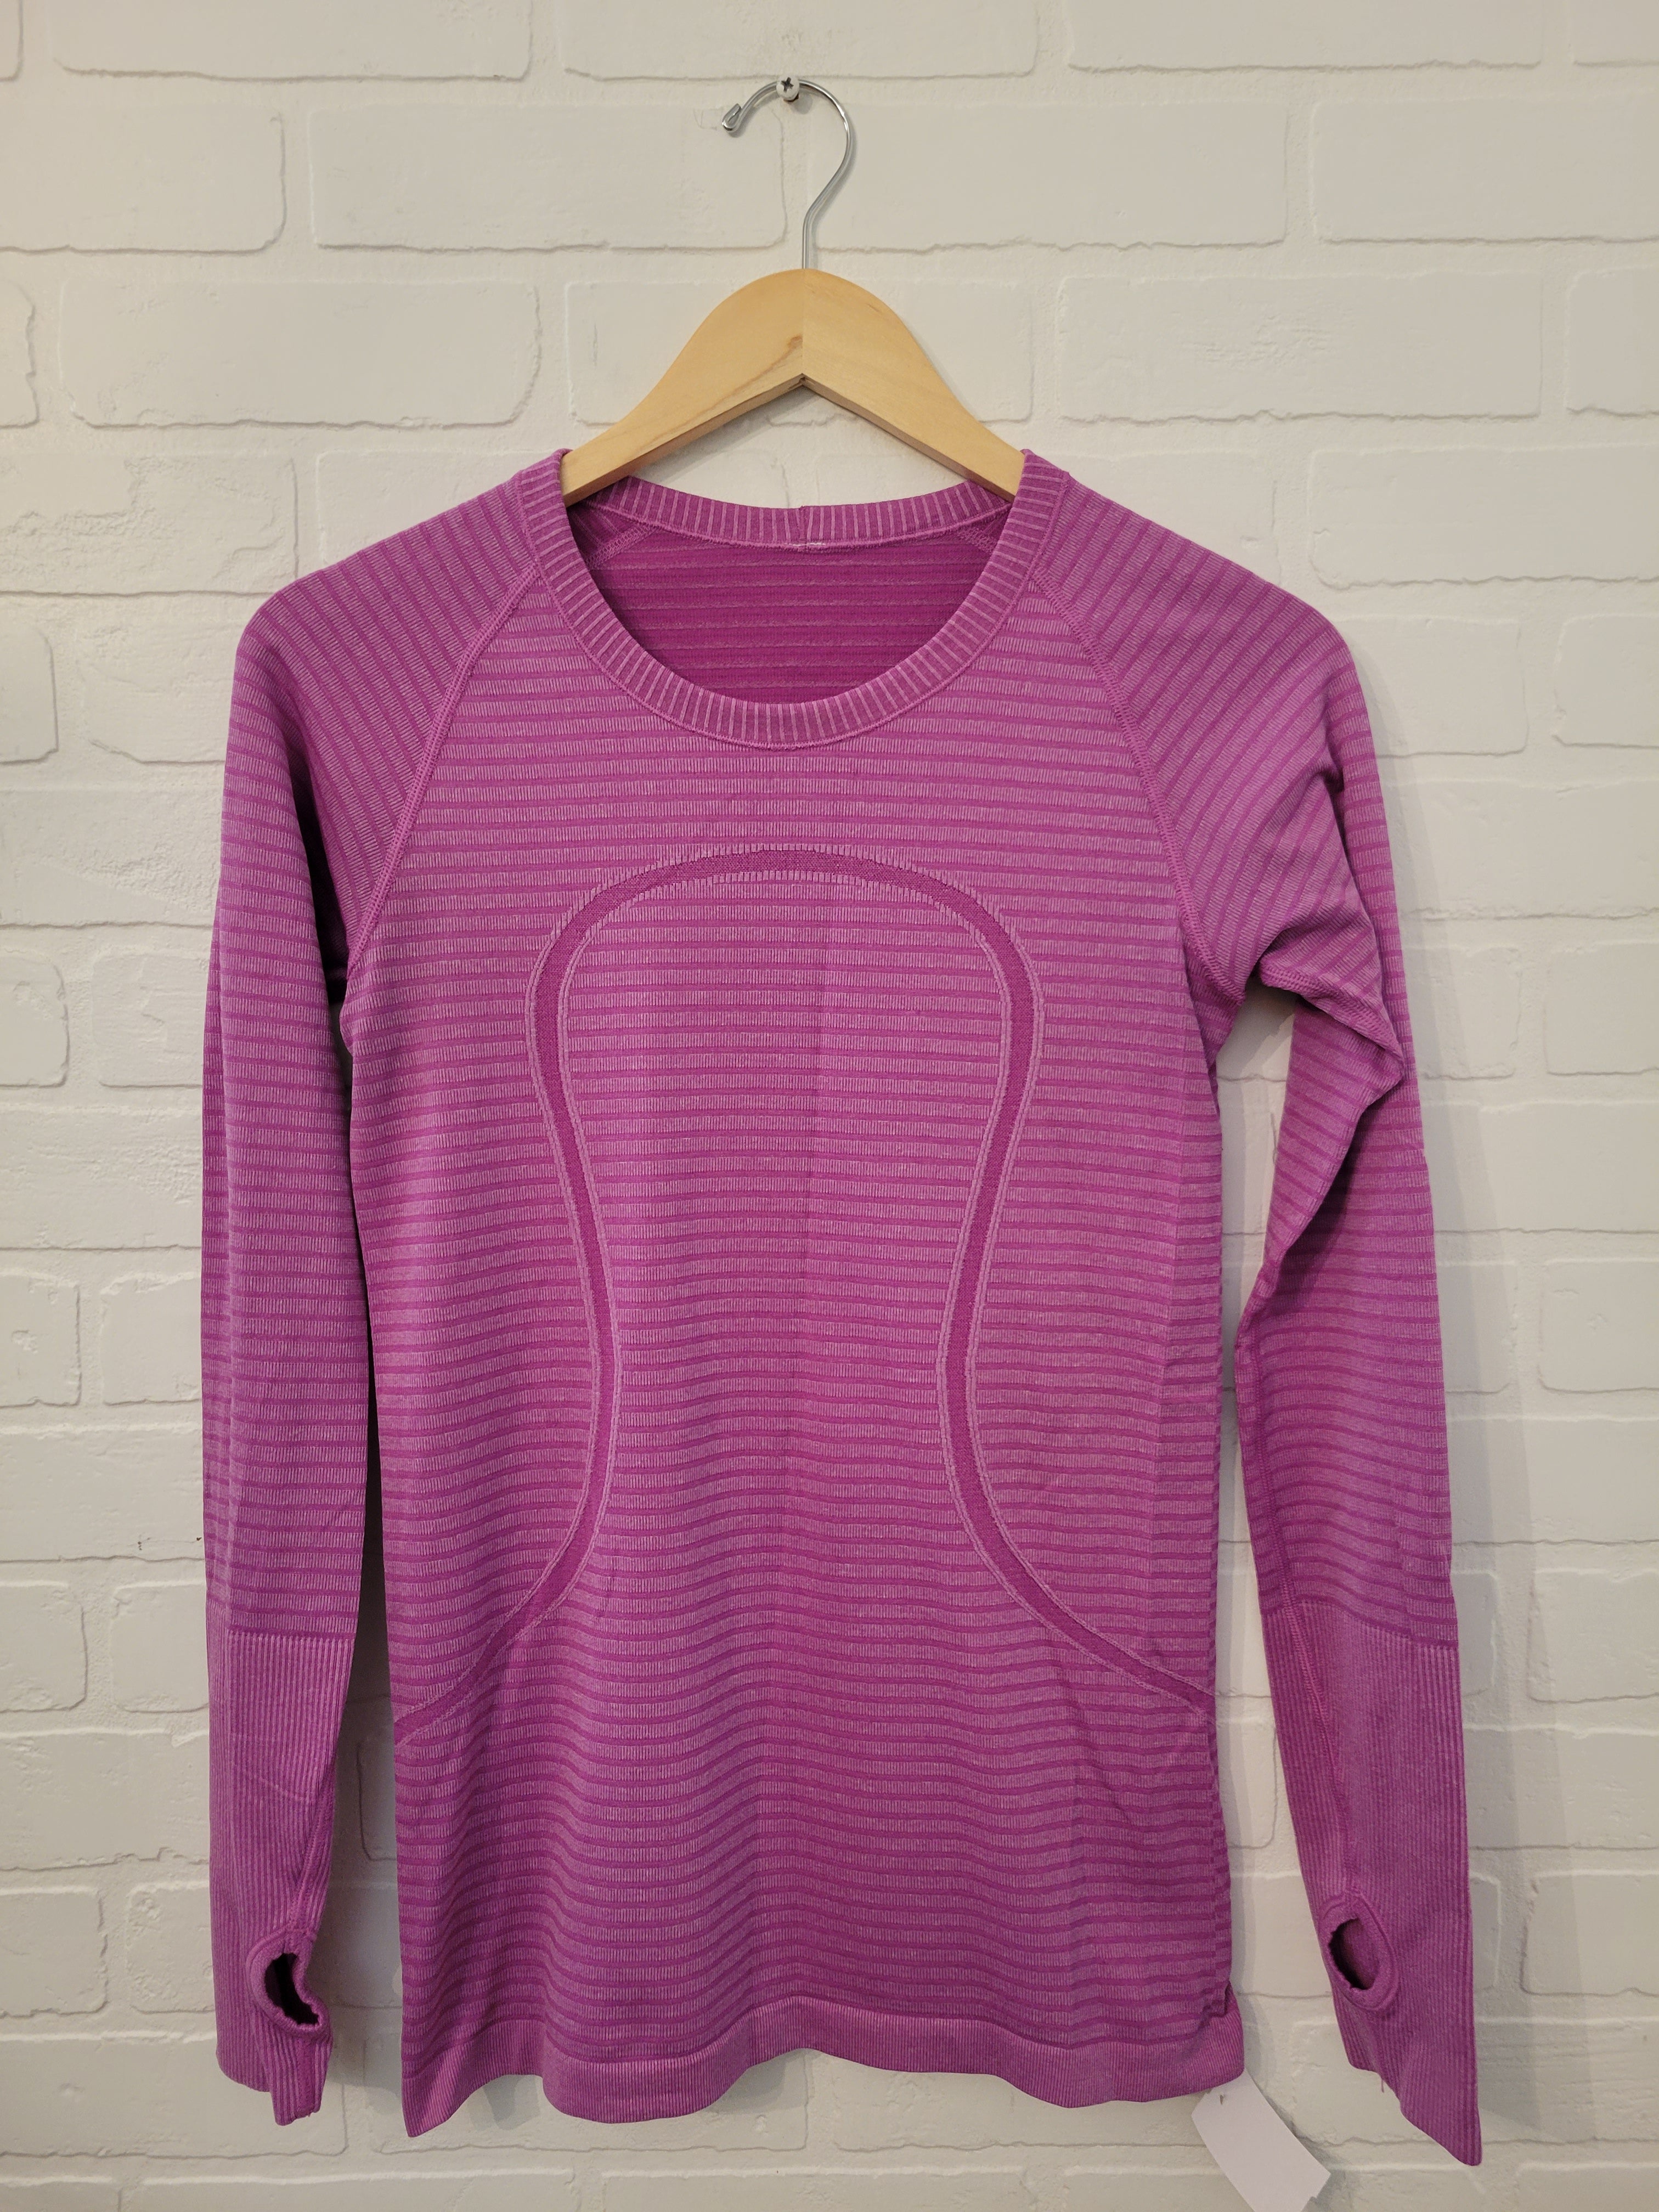 lululemon athletica Striped Active Shirts & Tops